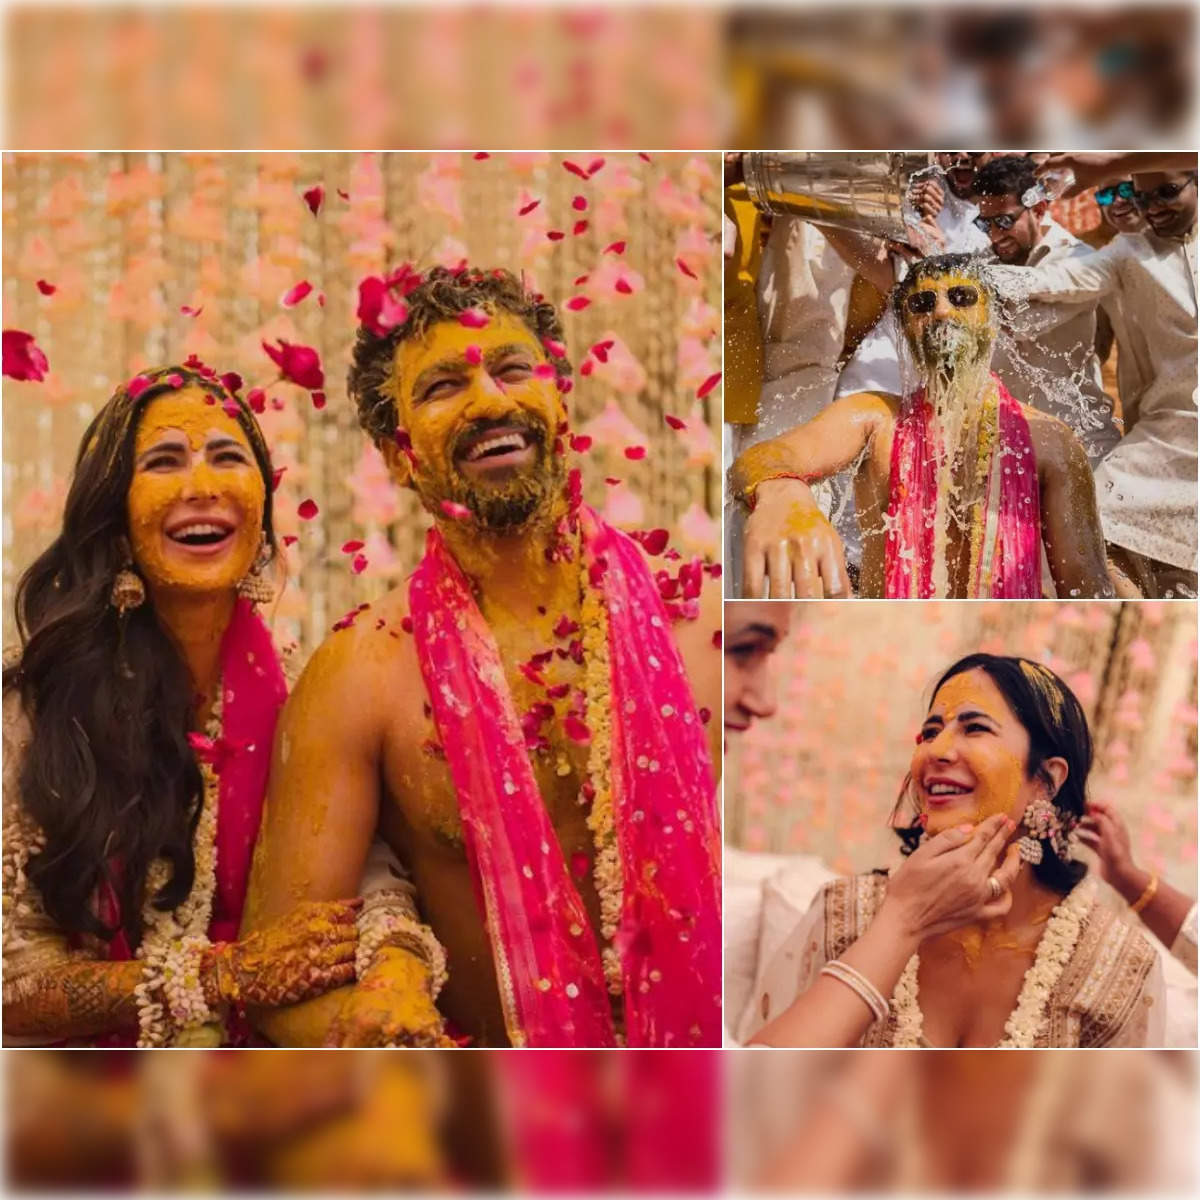 Kiara Advani looks the happiest as she poses with brother Mishaal in pics  from her Haldi